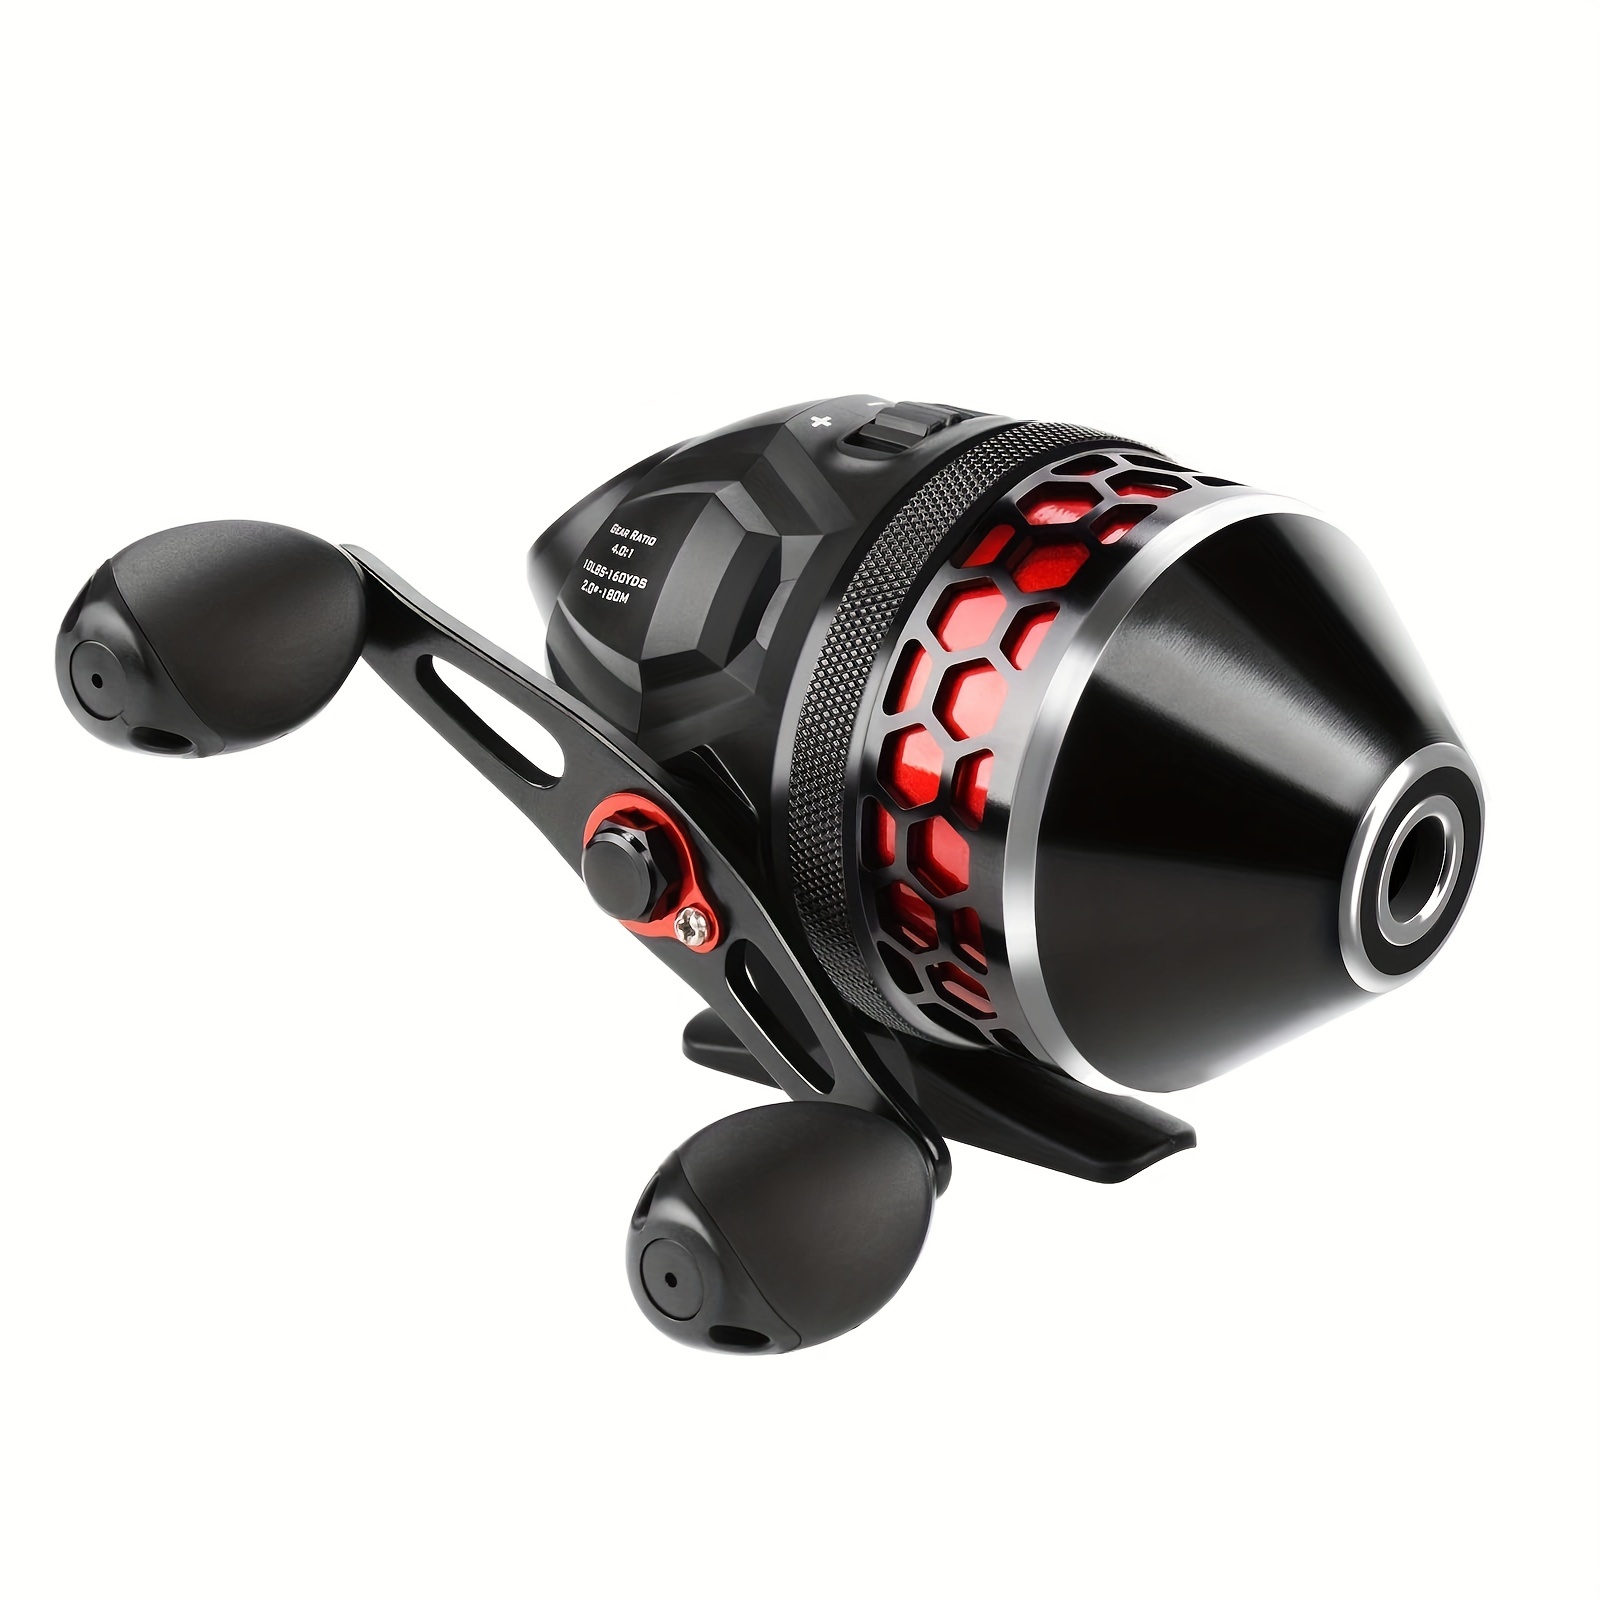 KastKing Brutus Spincast Fishing Reel, Easy To Use Push Button Casting  Design, High Speed 4.0:1 Gear Ratio, 5 MaxiDur Ball Bearings, Reversible  Handle